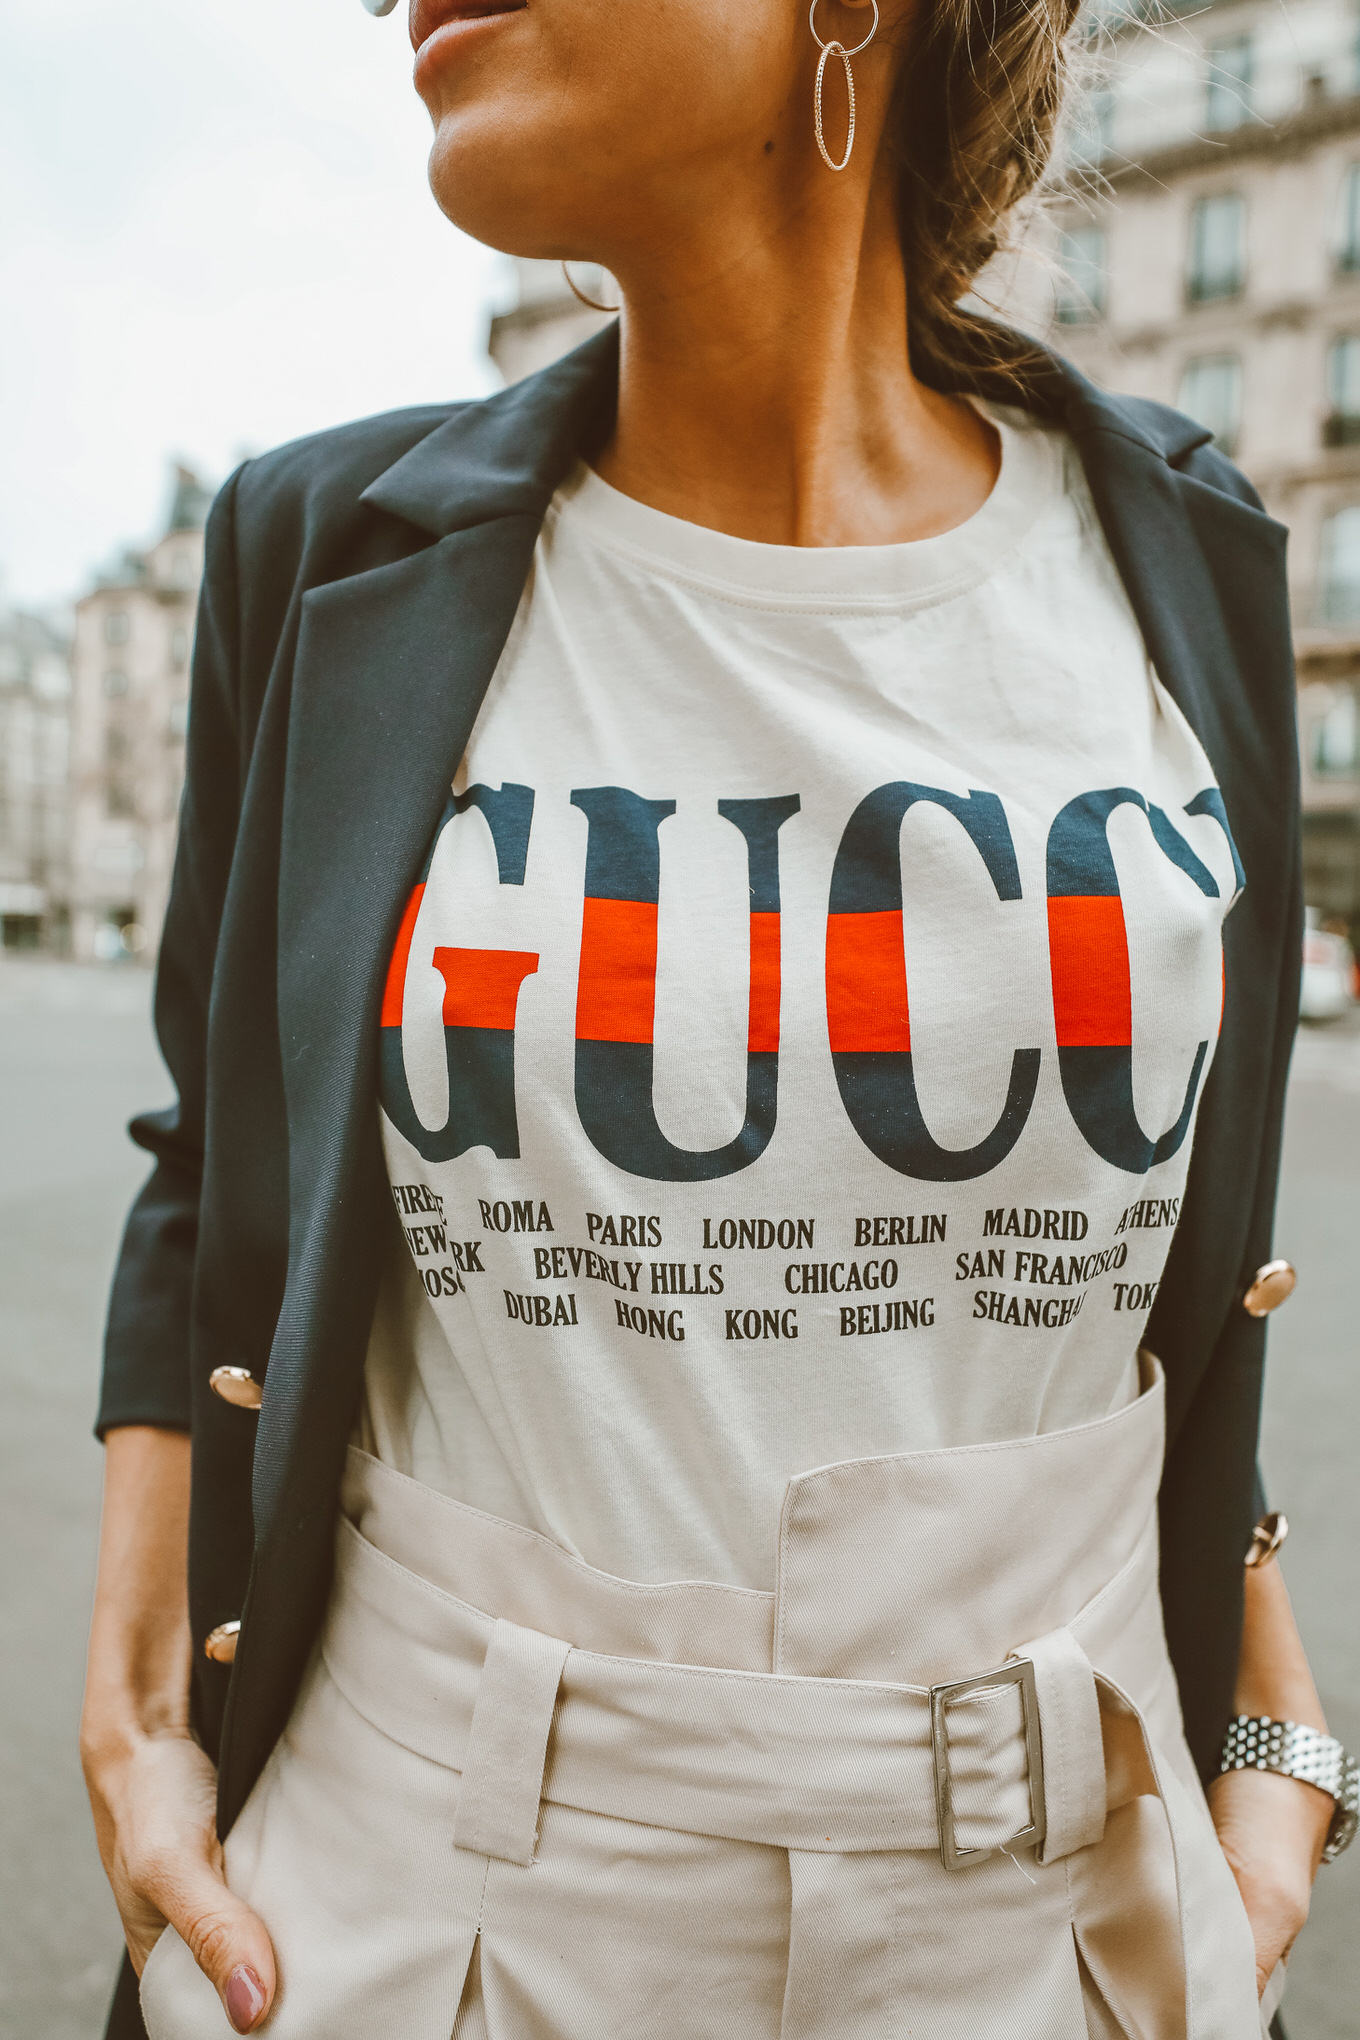 How to Dress to Impress When Traveling the World - Gucci Tee - Source Hello Fashion Blog - graphic tees - slogan tees - travel outfit ideas - how to look stylish while traveling - travel packing tips